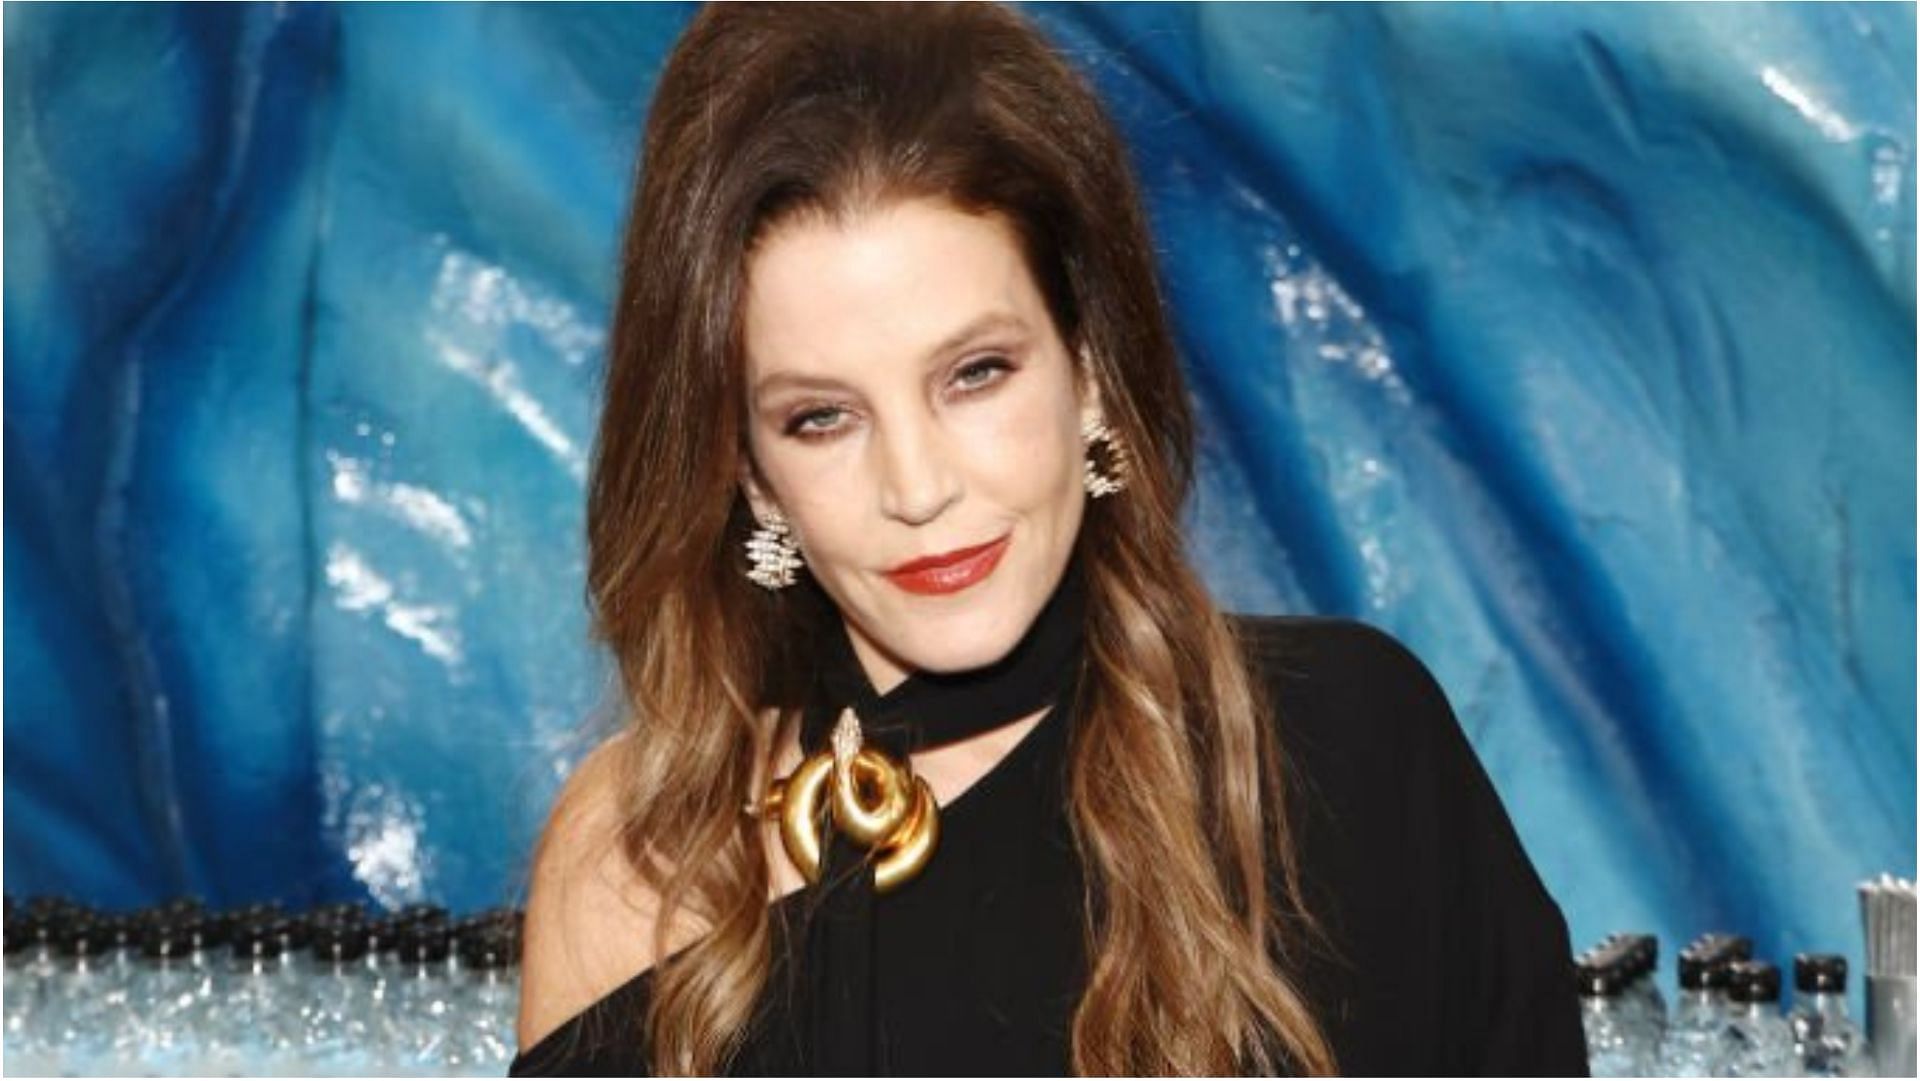 Lisa Marie Presley died of cardiac arrest at the age of 54 (Image via Joe Scarnici/Getty Images)